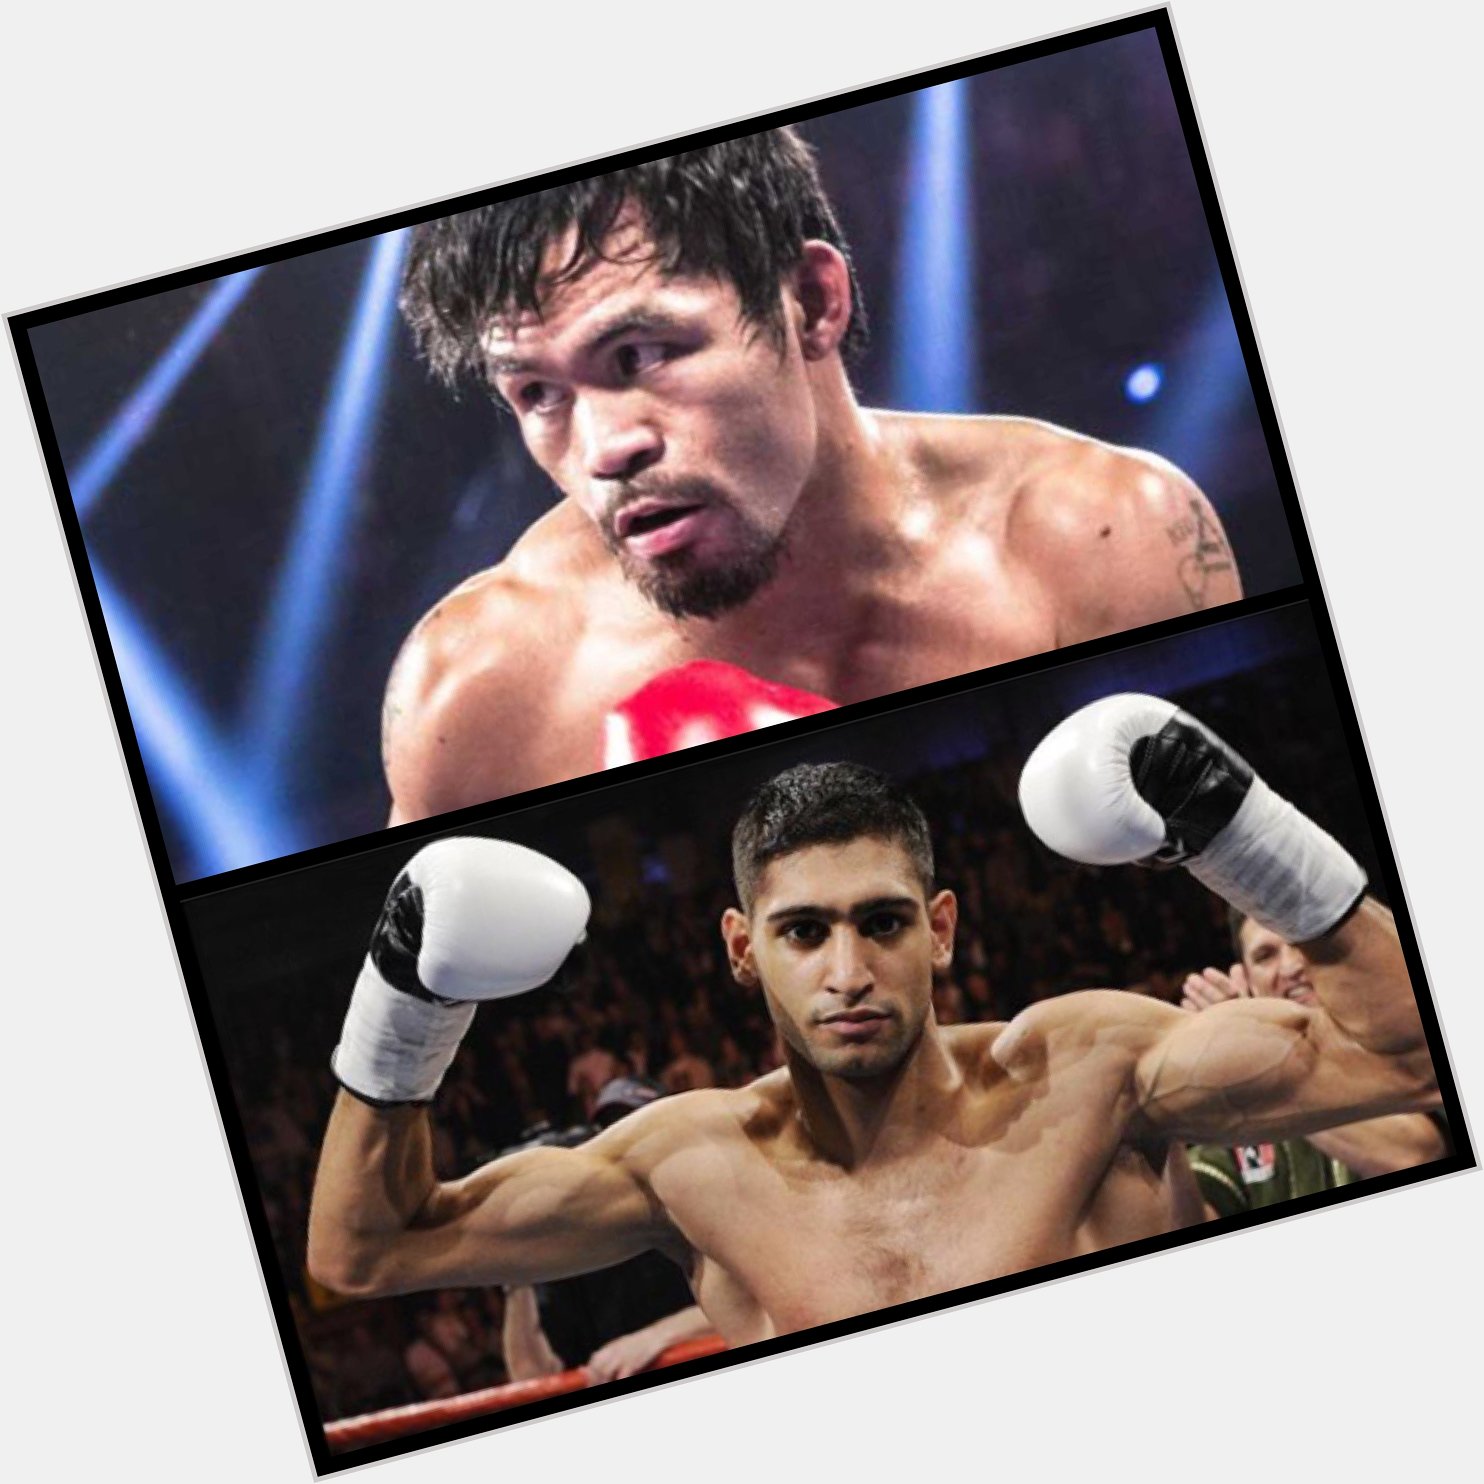 Happy Birthday Manny Pacquiao! Do you guys think we will see this fight in 2016? 